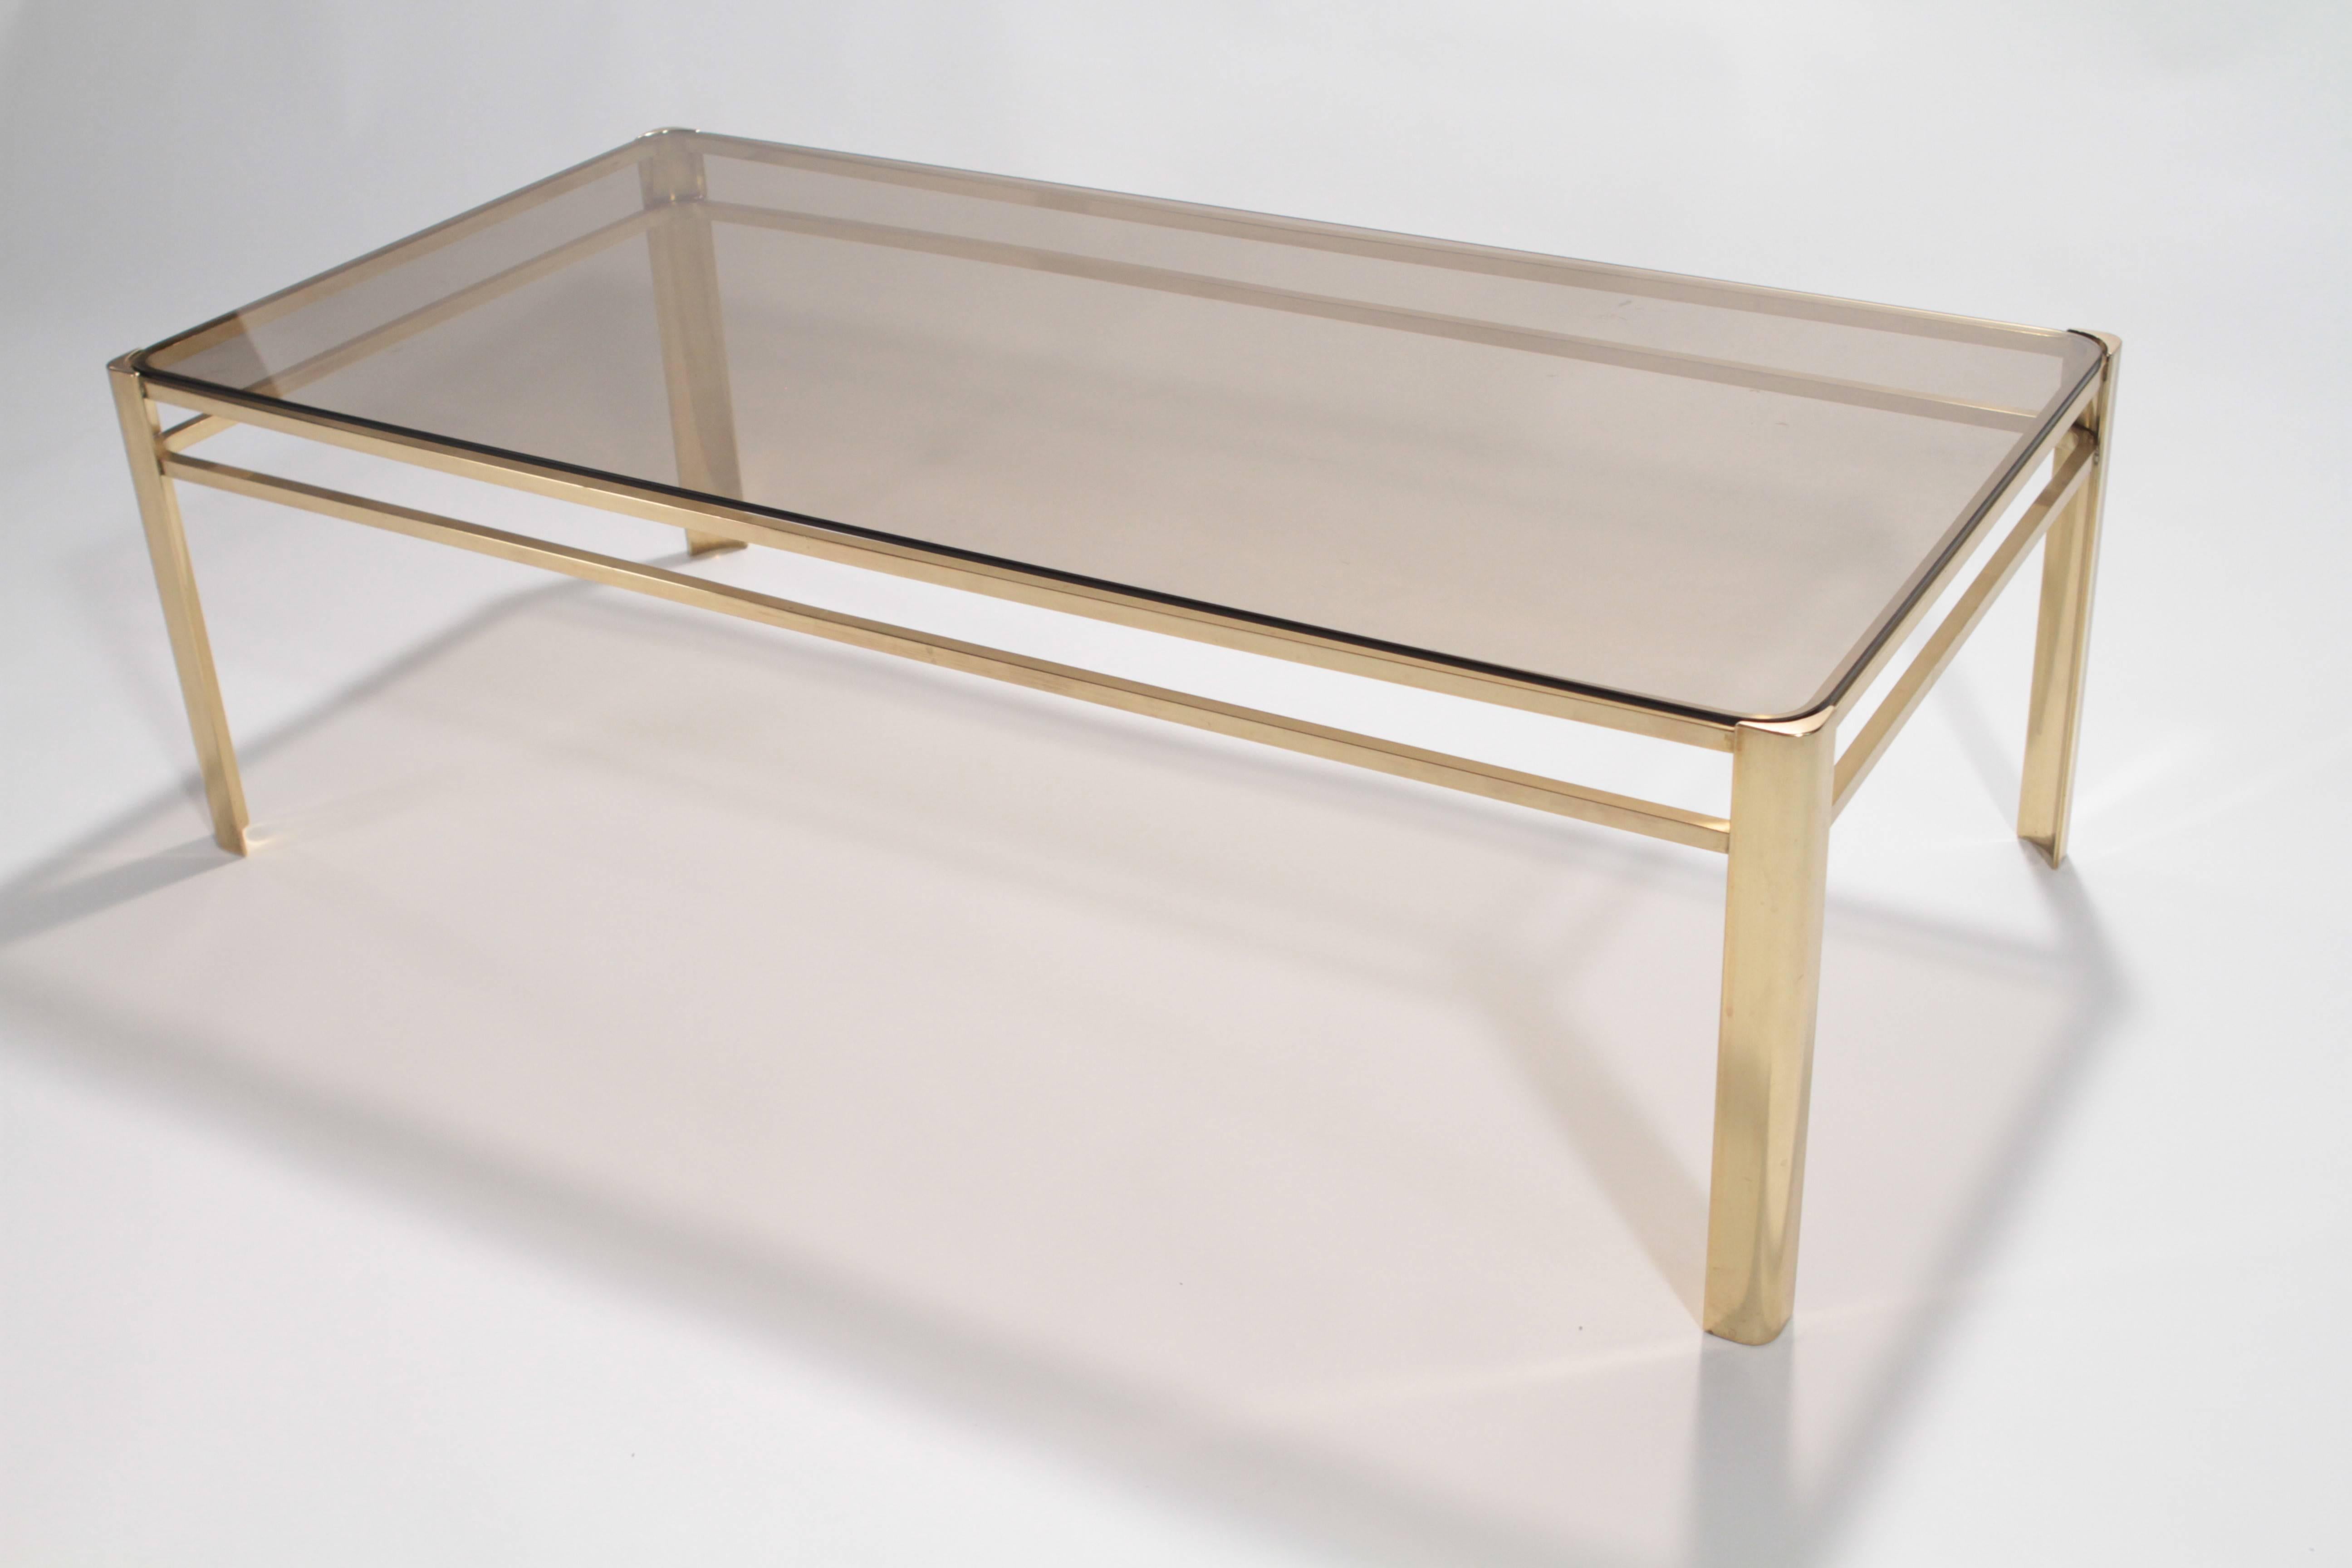 A polished bronze and smoked smoked glass coffee table by Jacques Quinet (1918-1992) for Maison Malabert. Signed and inscribed Broncz TR/387.